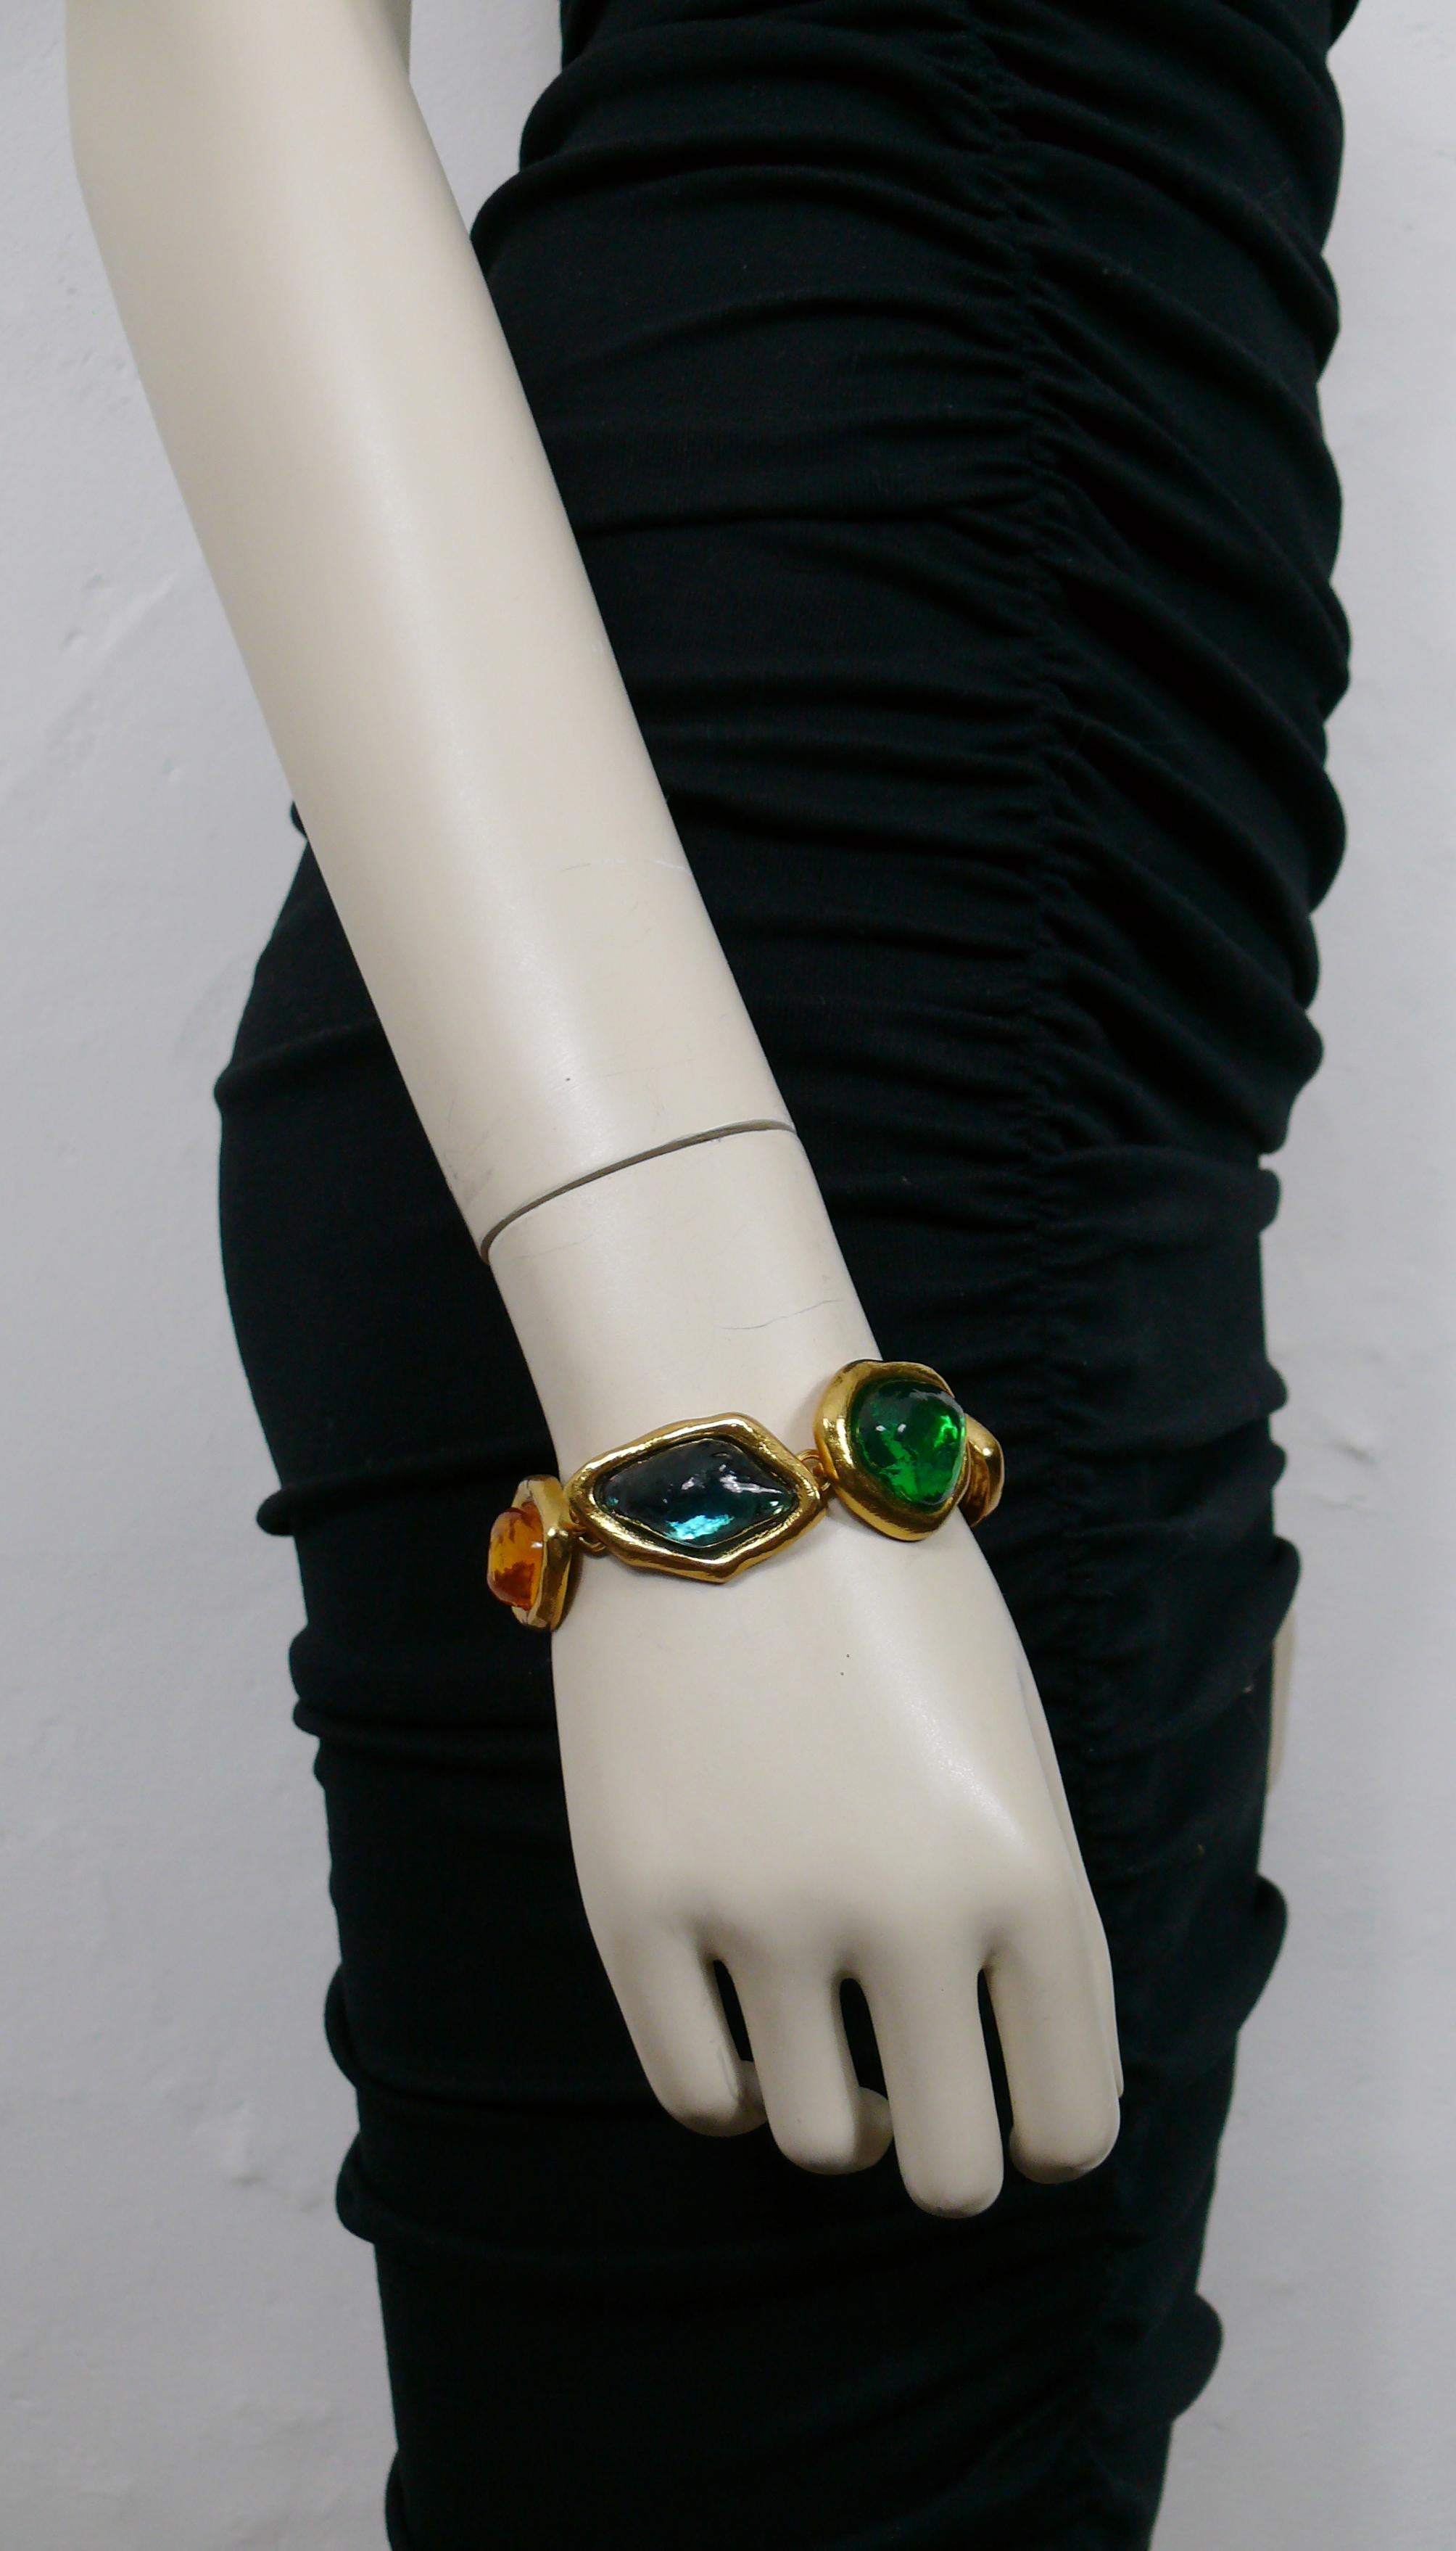 YVES SAINT LAURENT vintage gold toned irregular shaped link bracelet embellished with three dimensional multicolored resin cabochons.

Created by French parurier ROBERT GOOSSENS for YVES SAINT LAURENT.

Adjustable T bar and toggle closure.

Embossed